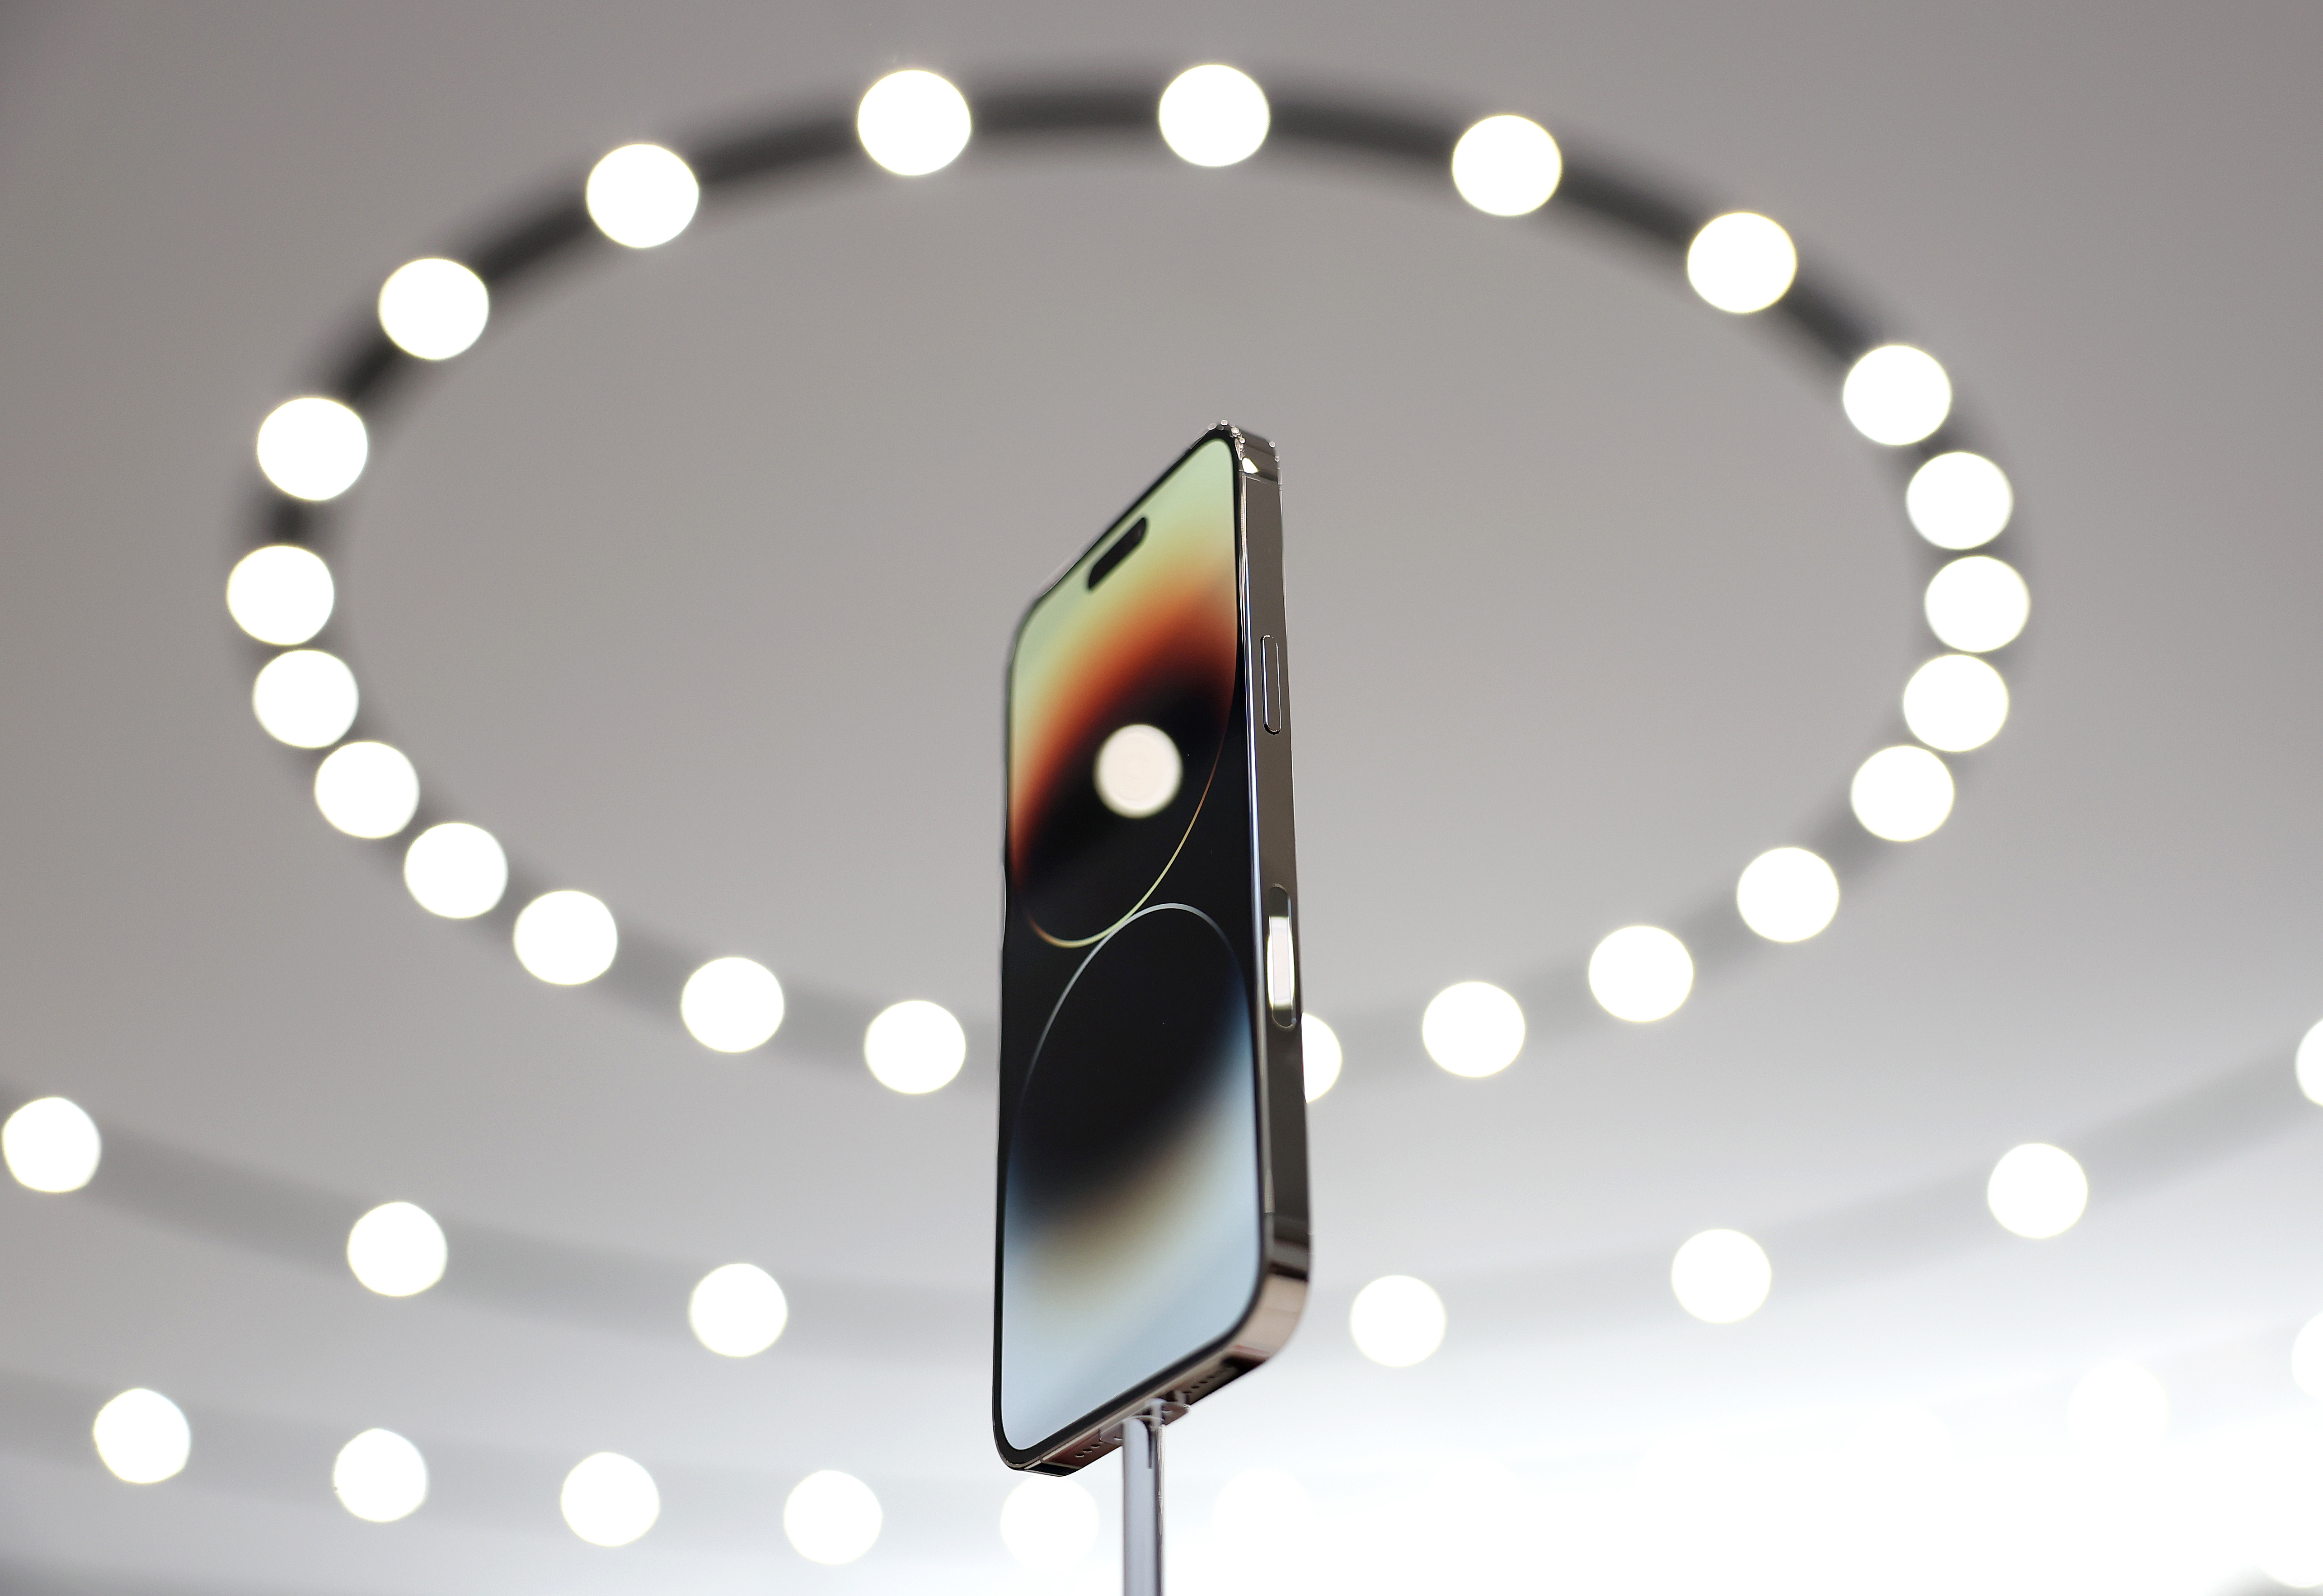 A new iPhone 14 Pro is displayed during an Apple event in Cupertino, California, on September 7, 2022.